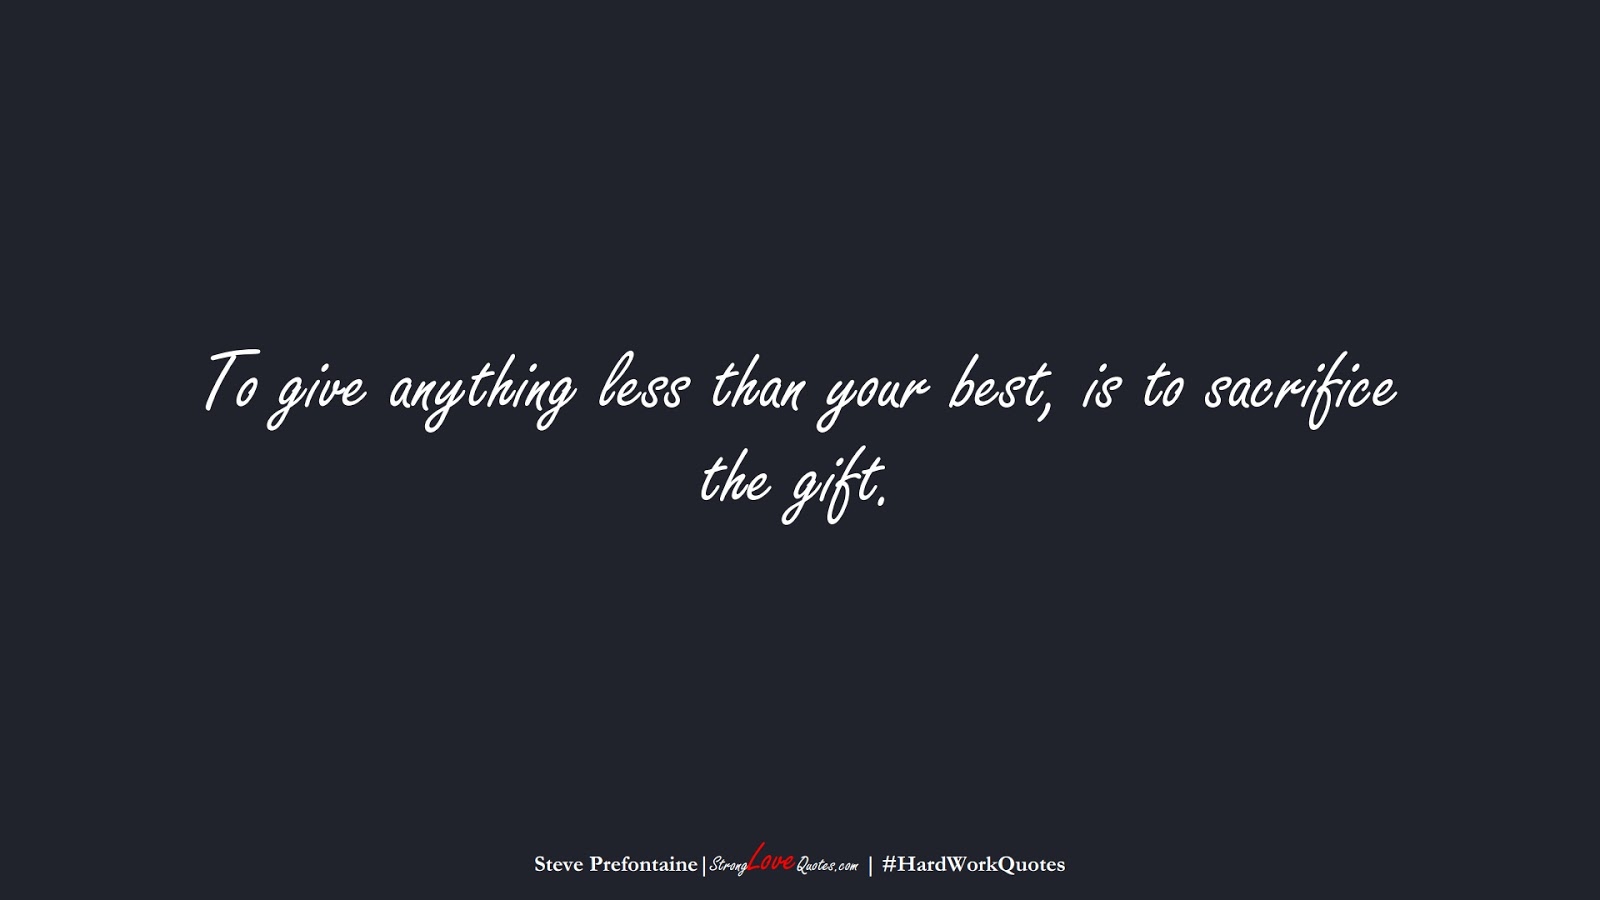 To give anything less than your best, is to sacrifice the gift. (Steve Prefontaine);  #HardWorkQuotes